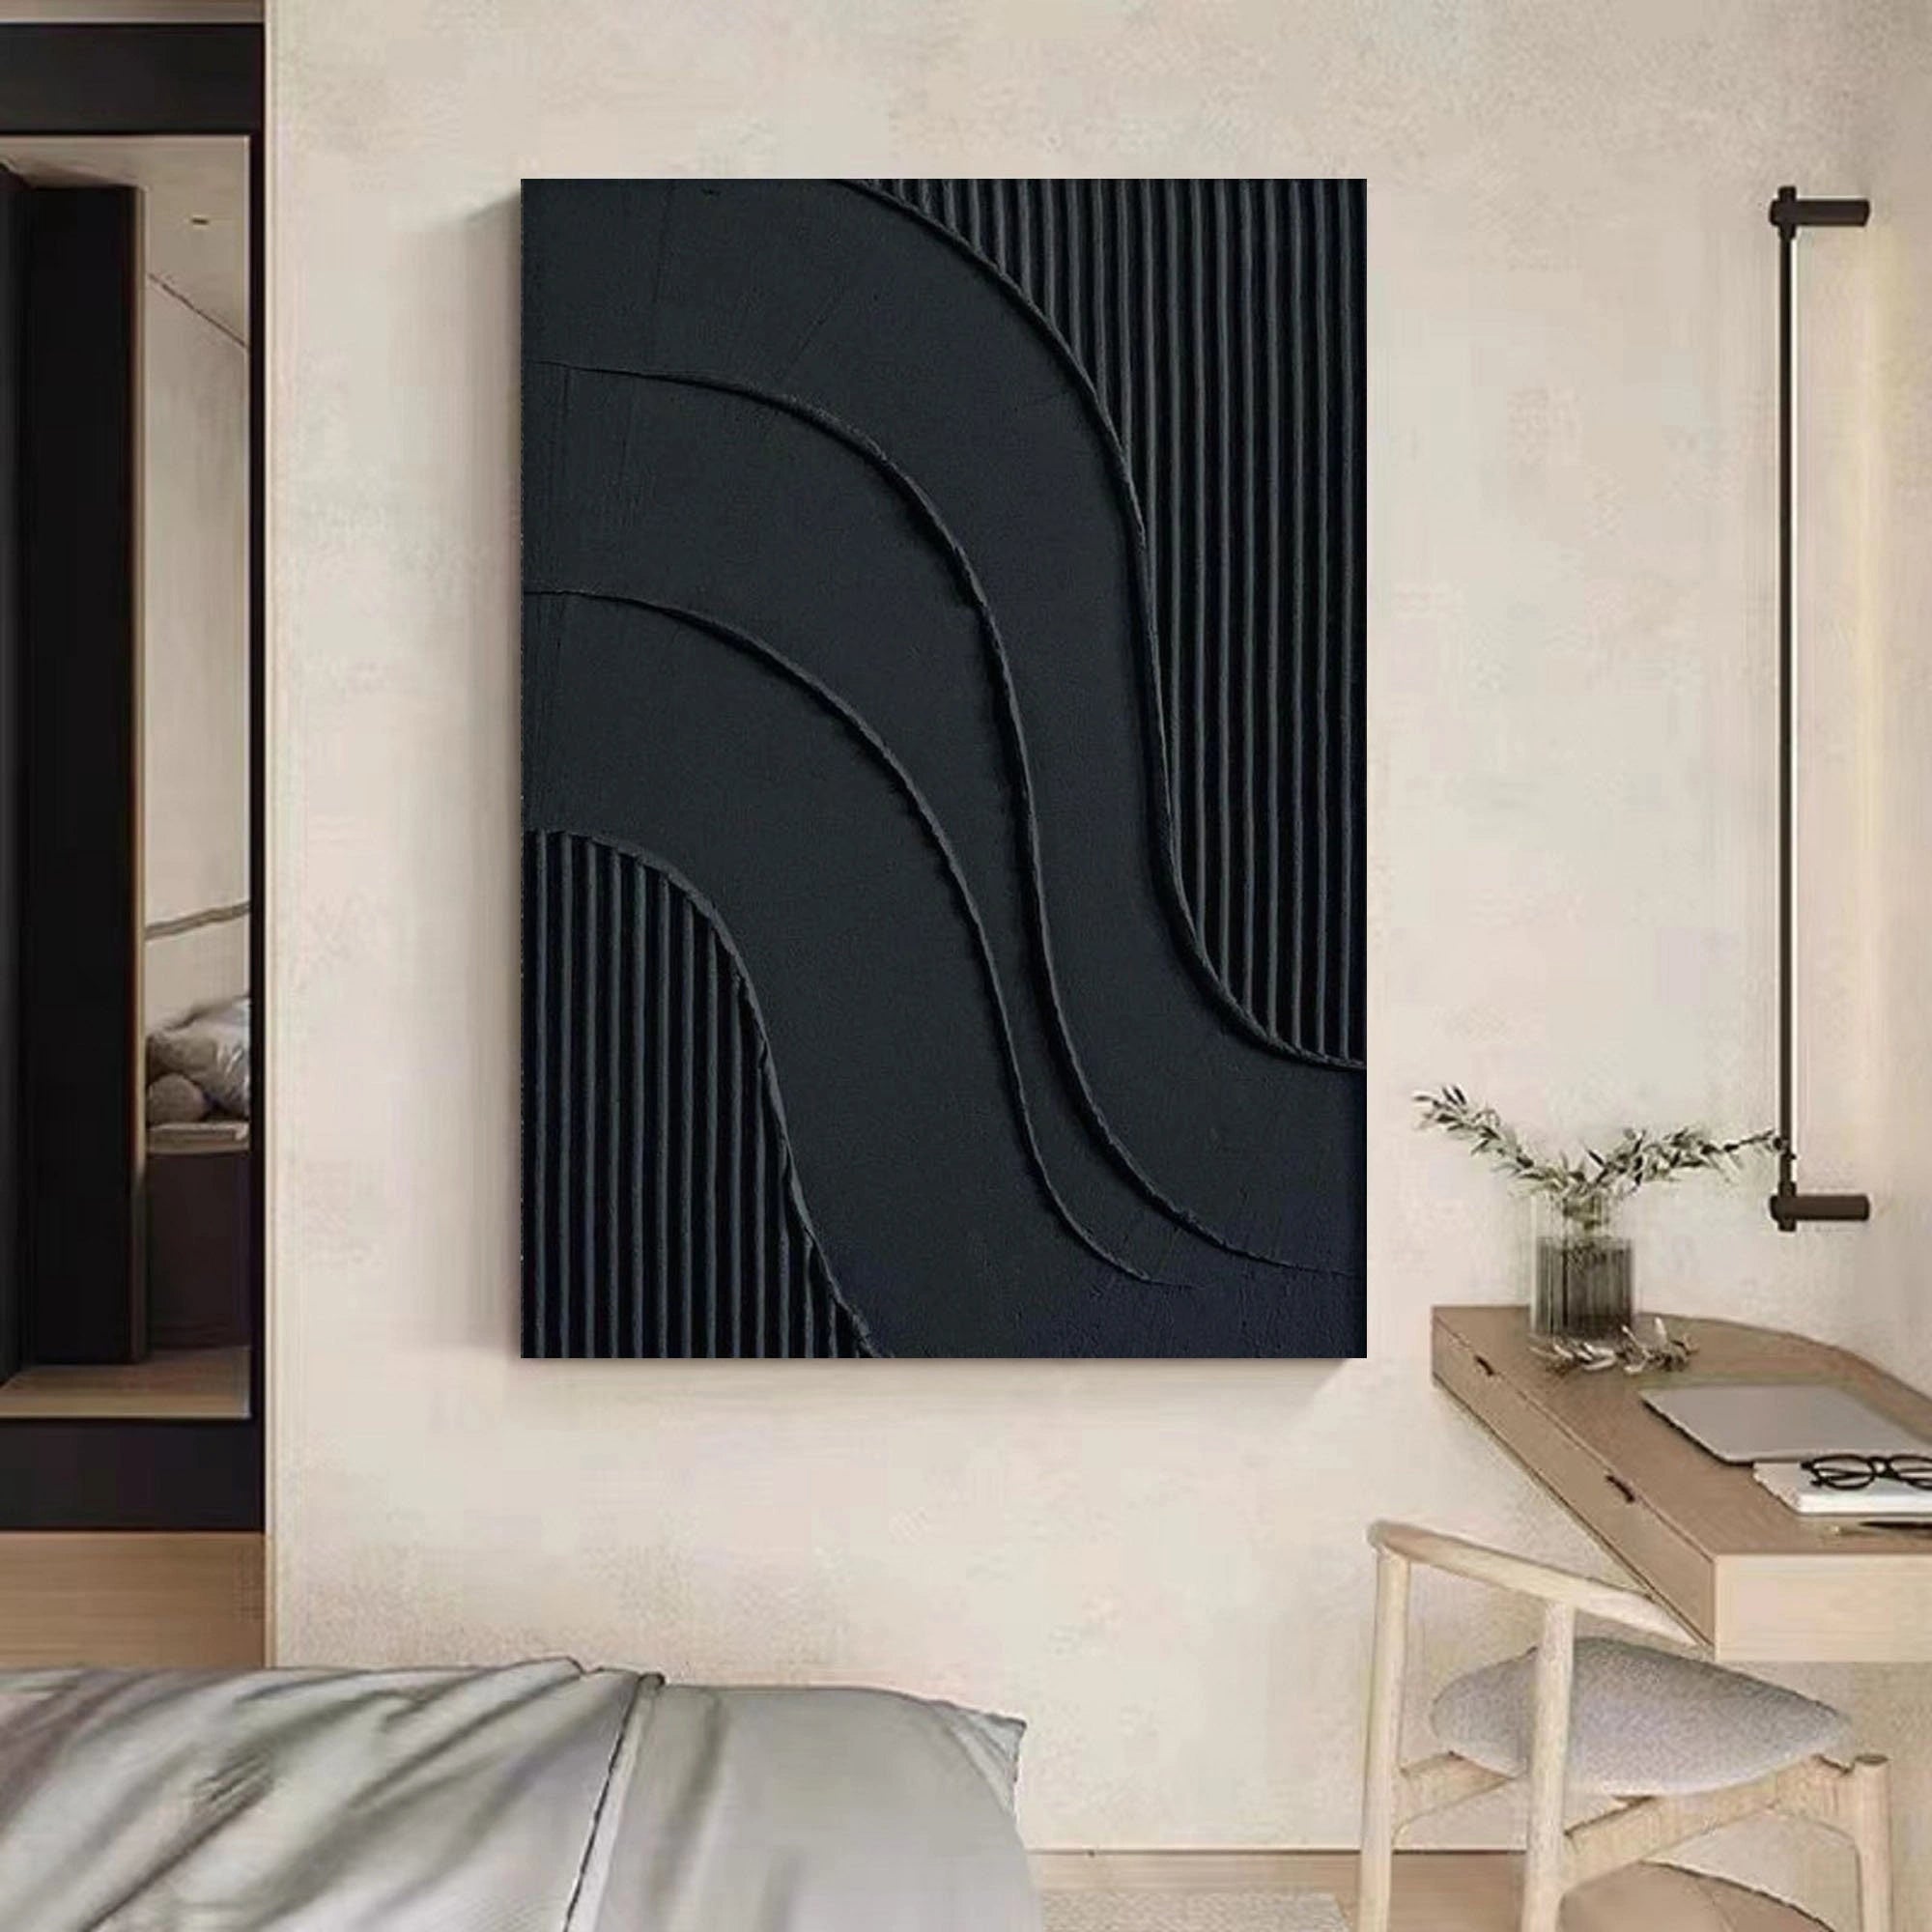 Black 3D Textured Minimalist Original Handcrafted Painting On Canvas Large Abstract Wall Art Luxury Modern Home Decor